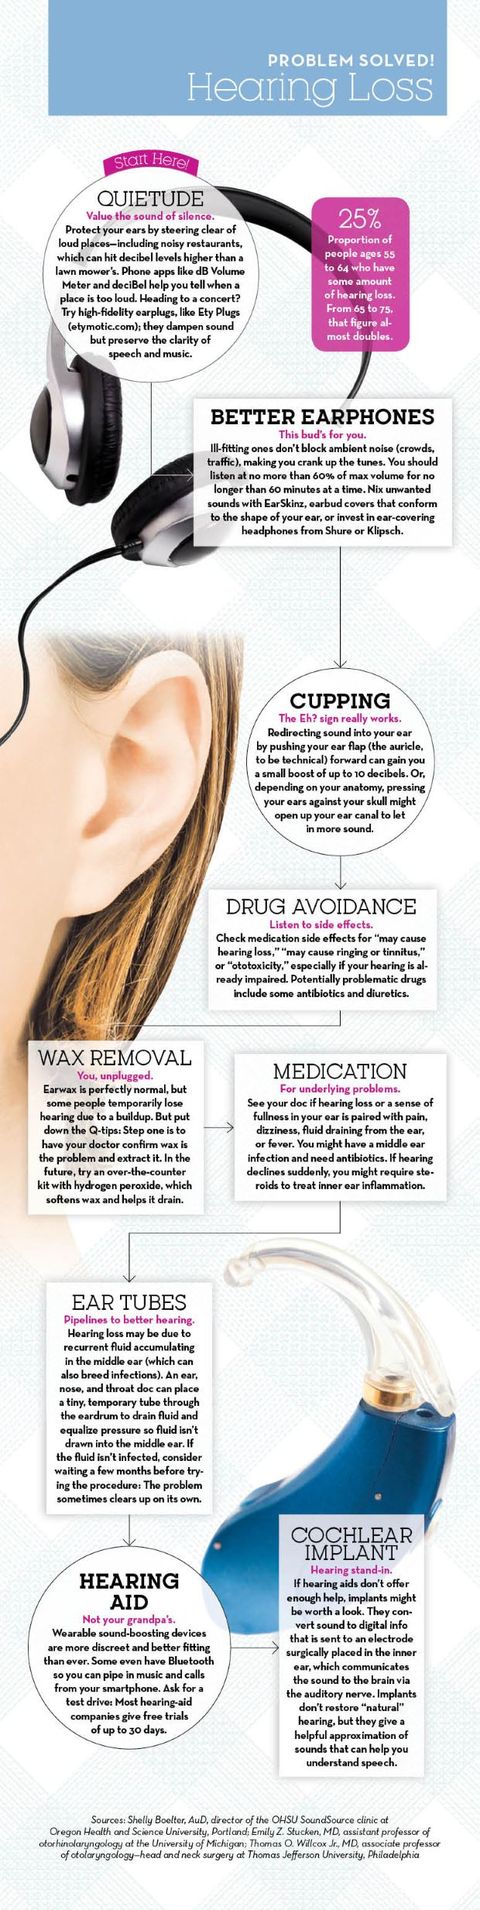 Infographic: Hearing Loss